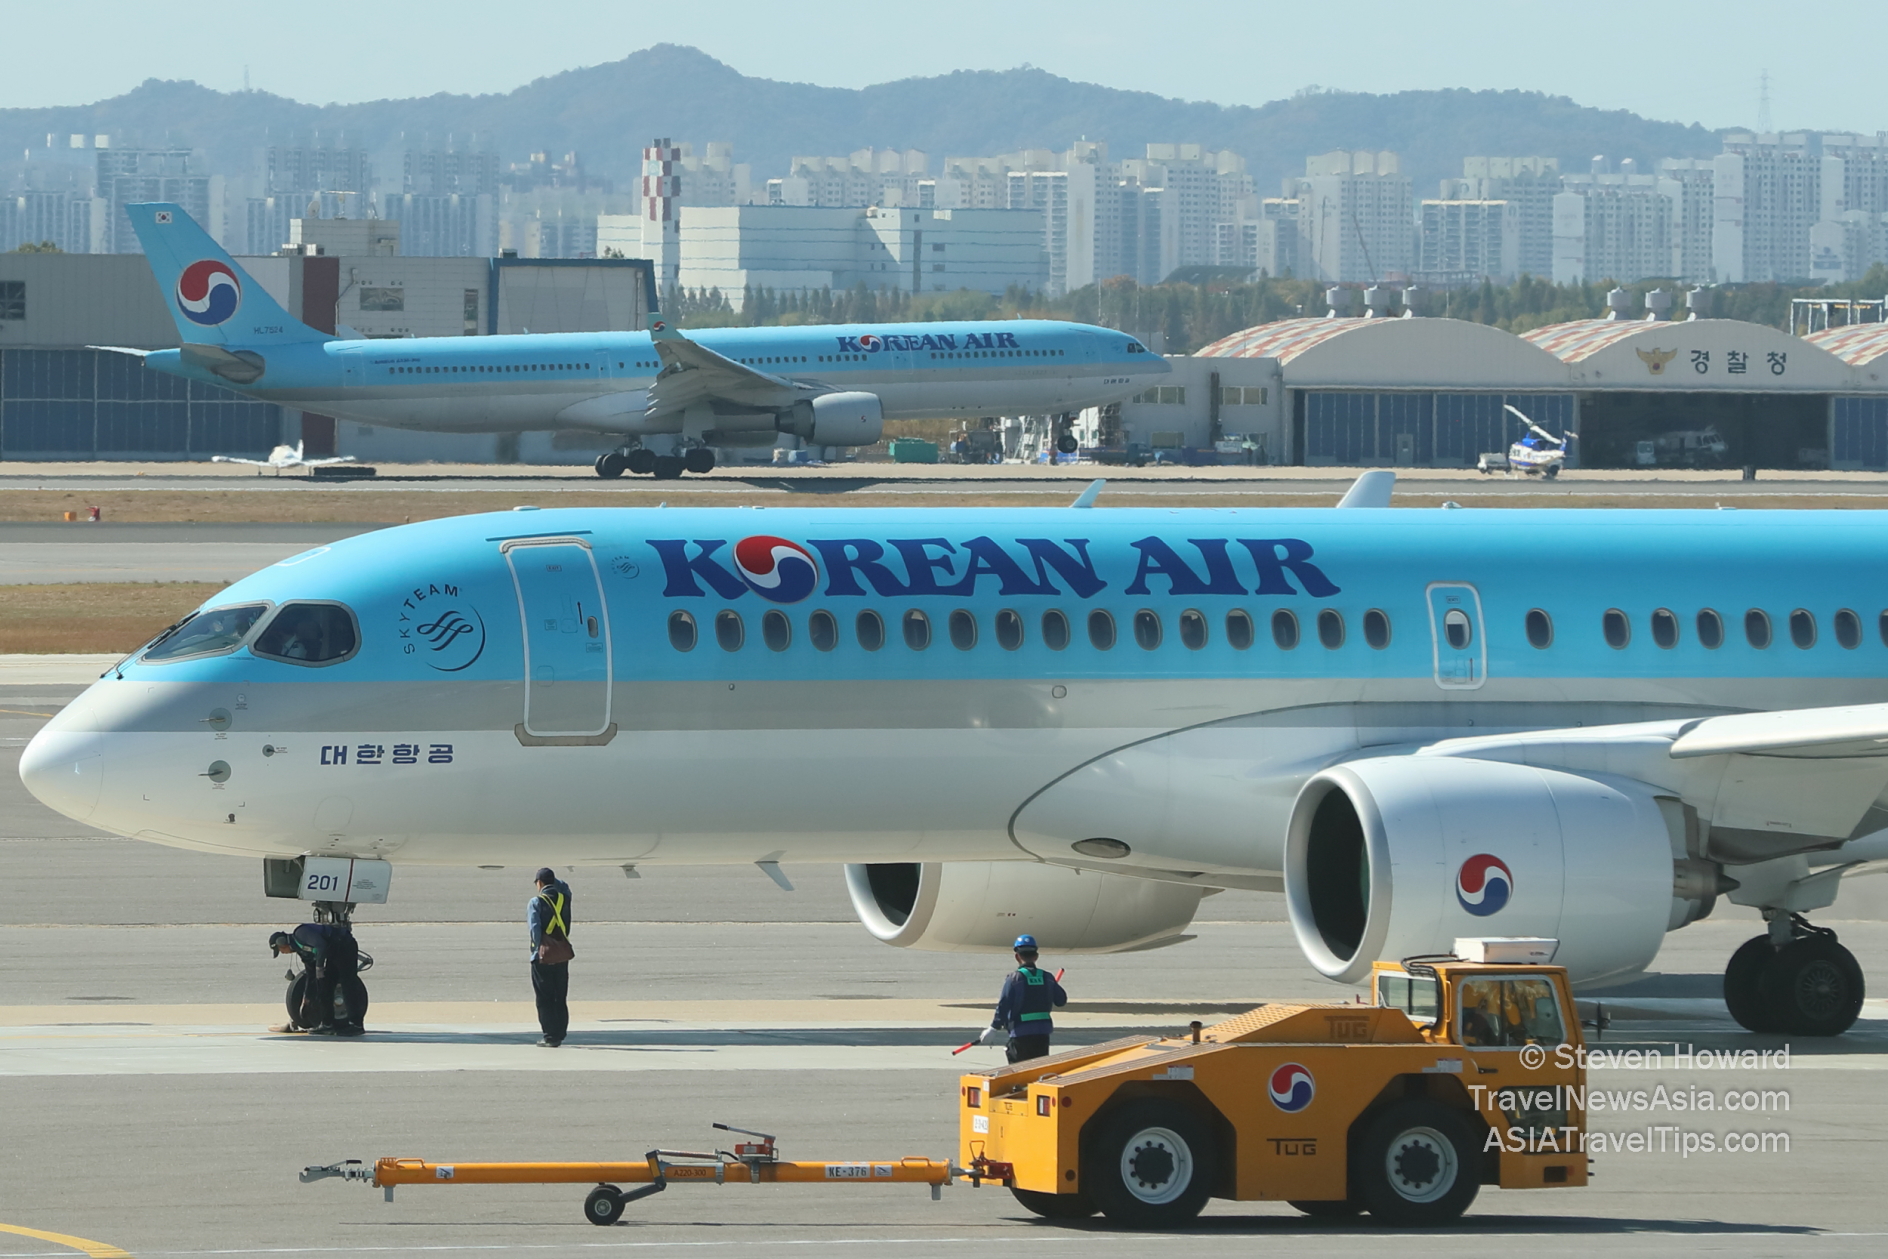 Korean Air. Picture by Steven Howard of TravelNewsAsia.com Click to enlarge.